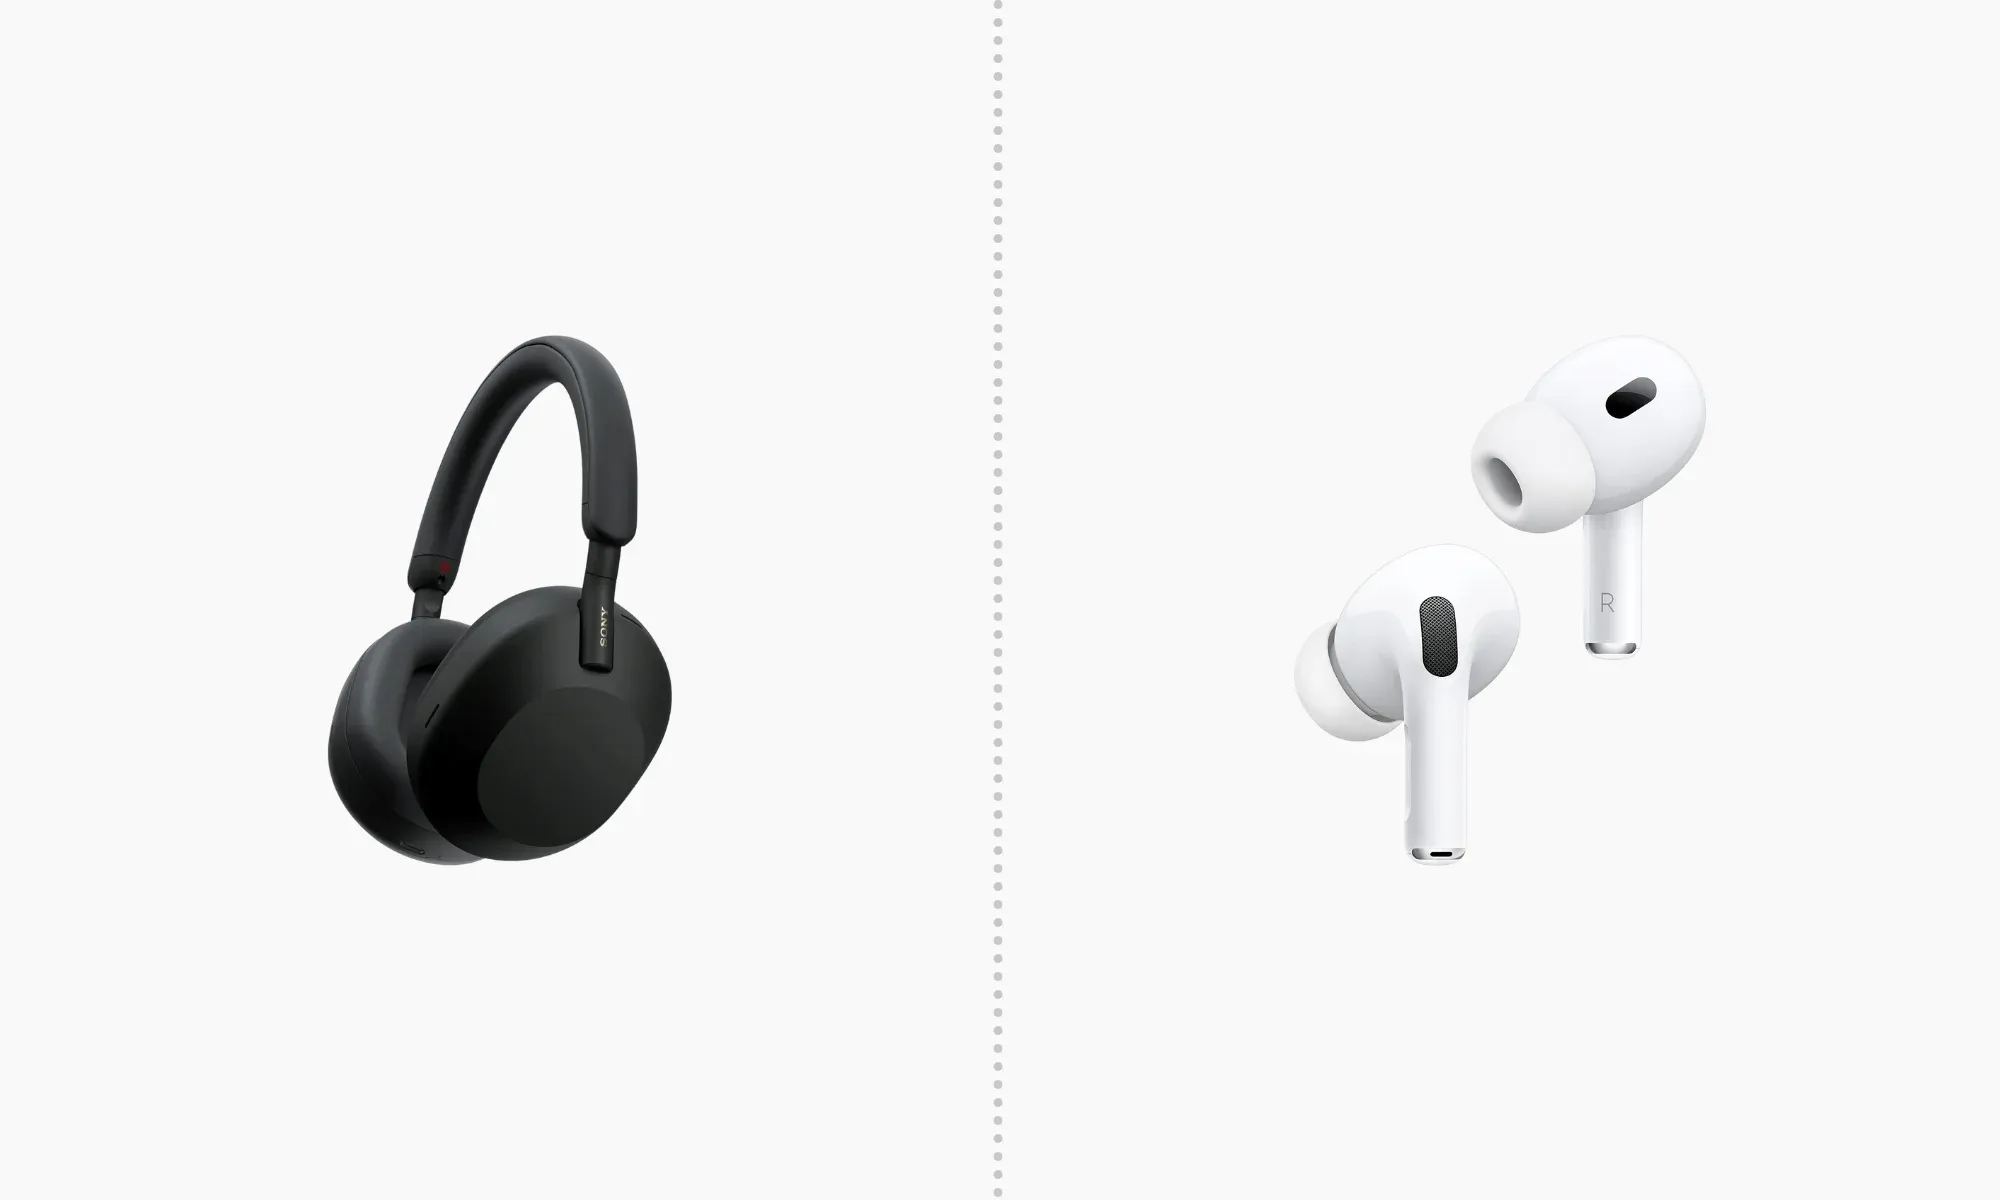 Sony WH-1000XM5 and AirPods Pro (2nd Generation)